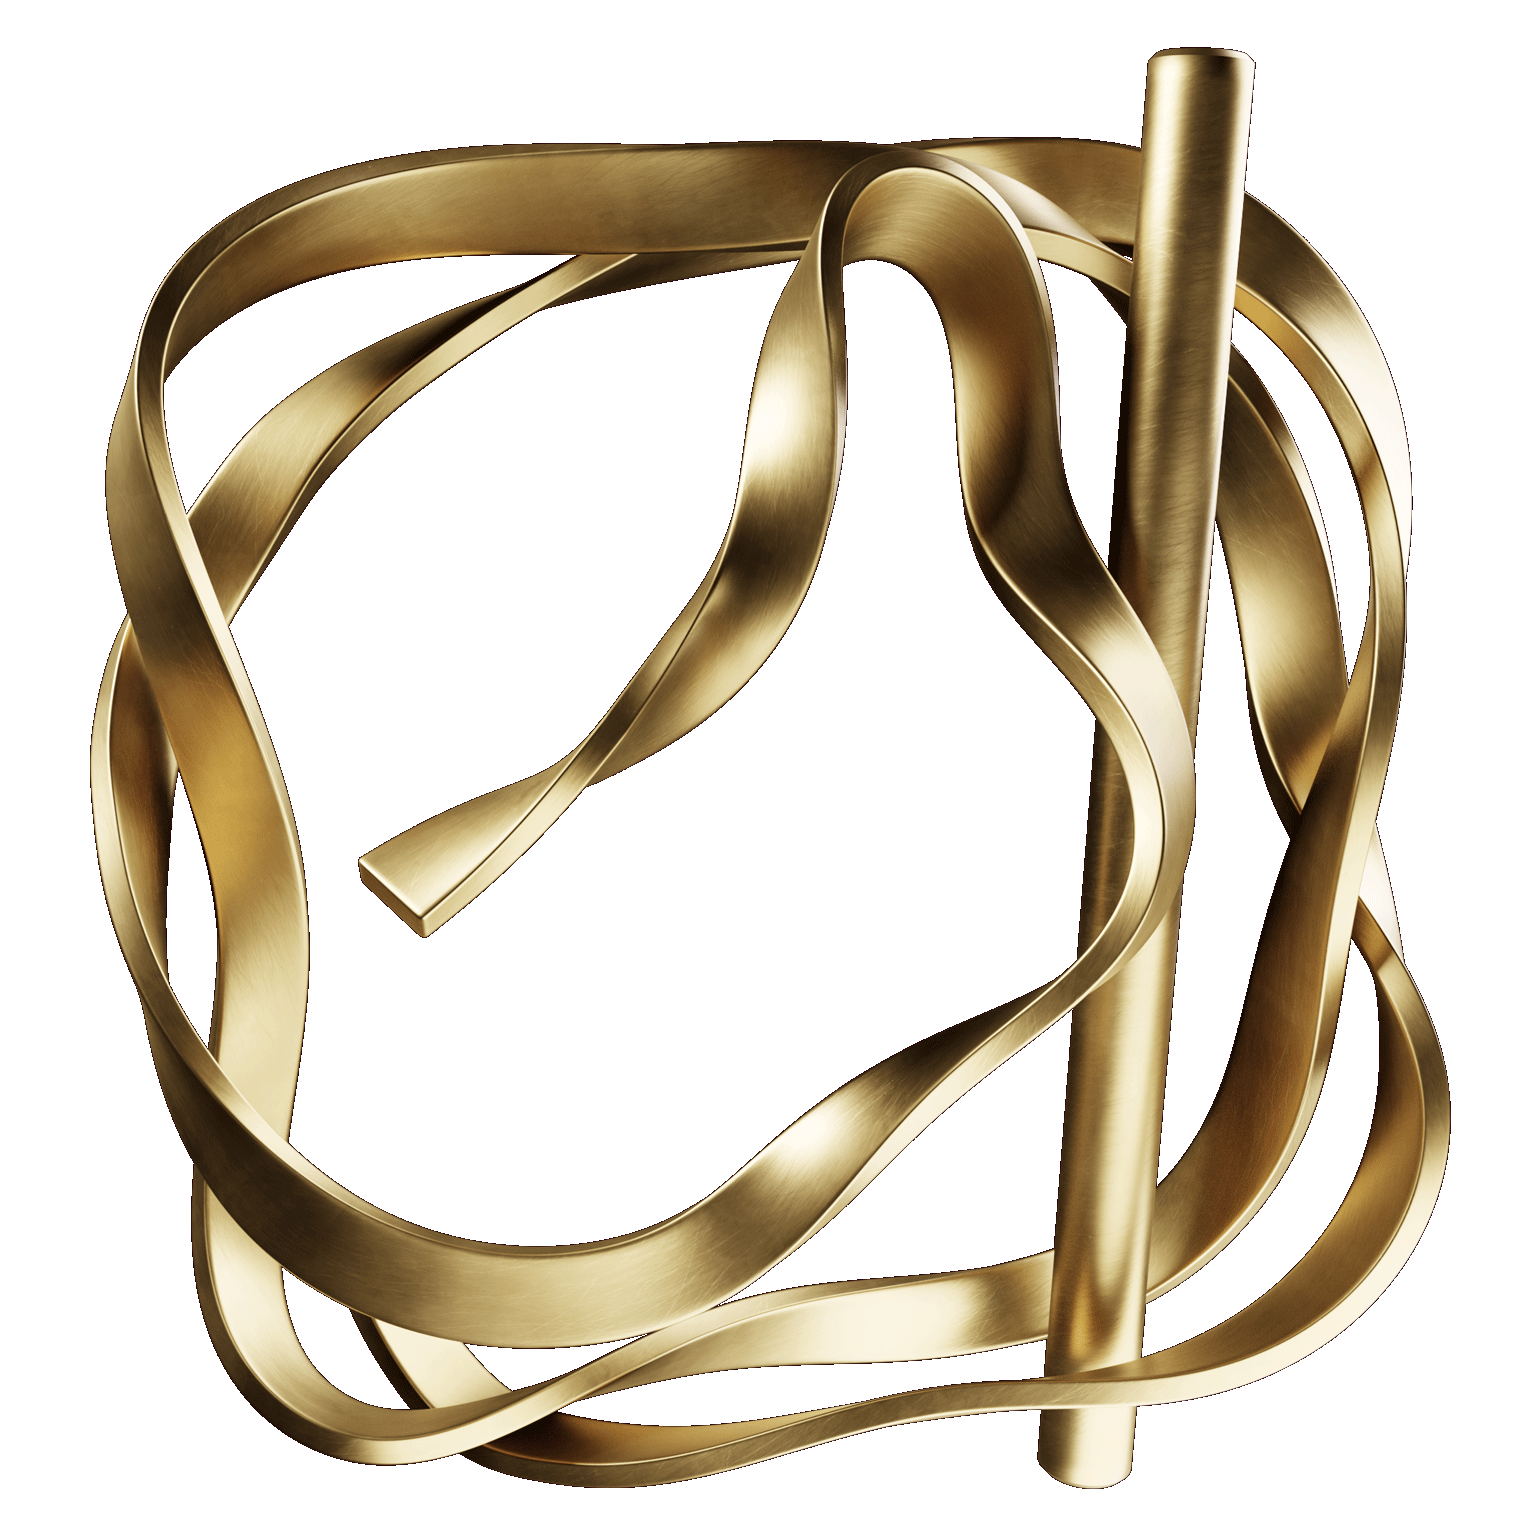 A scultpural form made of a thick brass ribbon, twisted and bent to give to create an impression of a figure surrounded by a rounded frame. Running through the right-side of the form is a brass cylinder. The overall image is a reference to the virtue 'Strength', frequently depicted by a feminine form supporting a column.